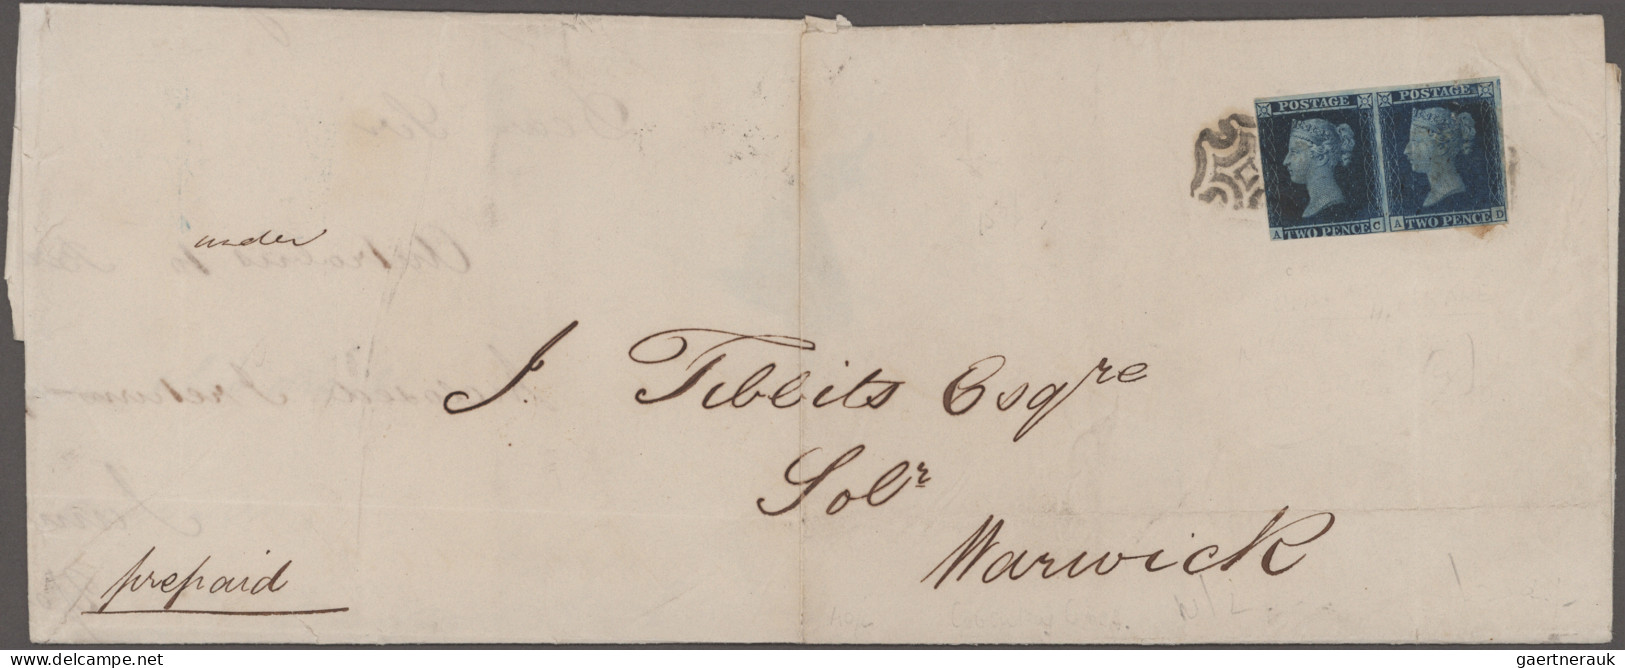 Great Britain - Post Marks: 1843 "Coventry" Maltese Cross Used As Obliterator On - Postmark Collection